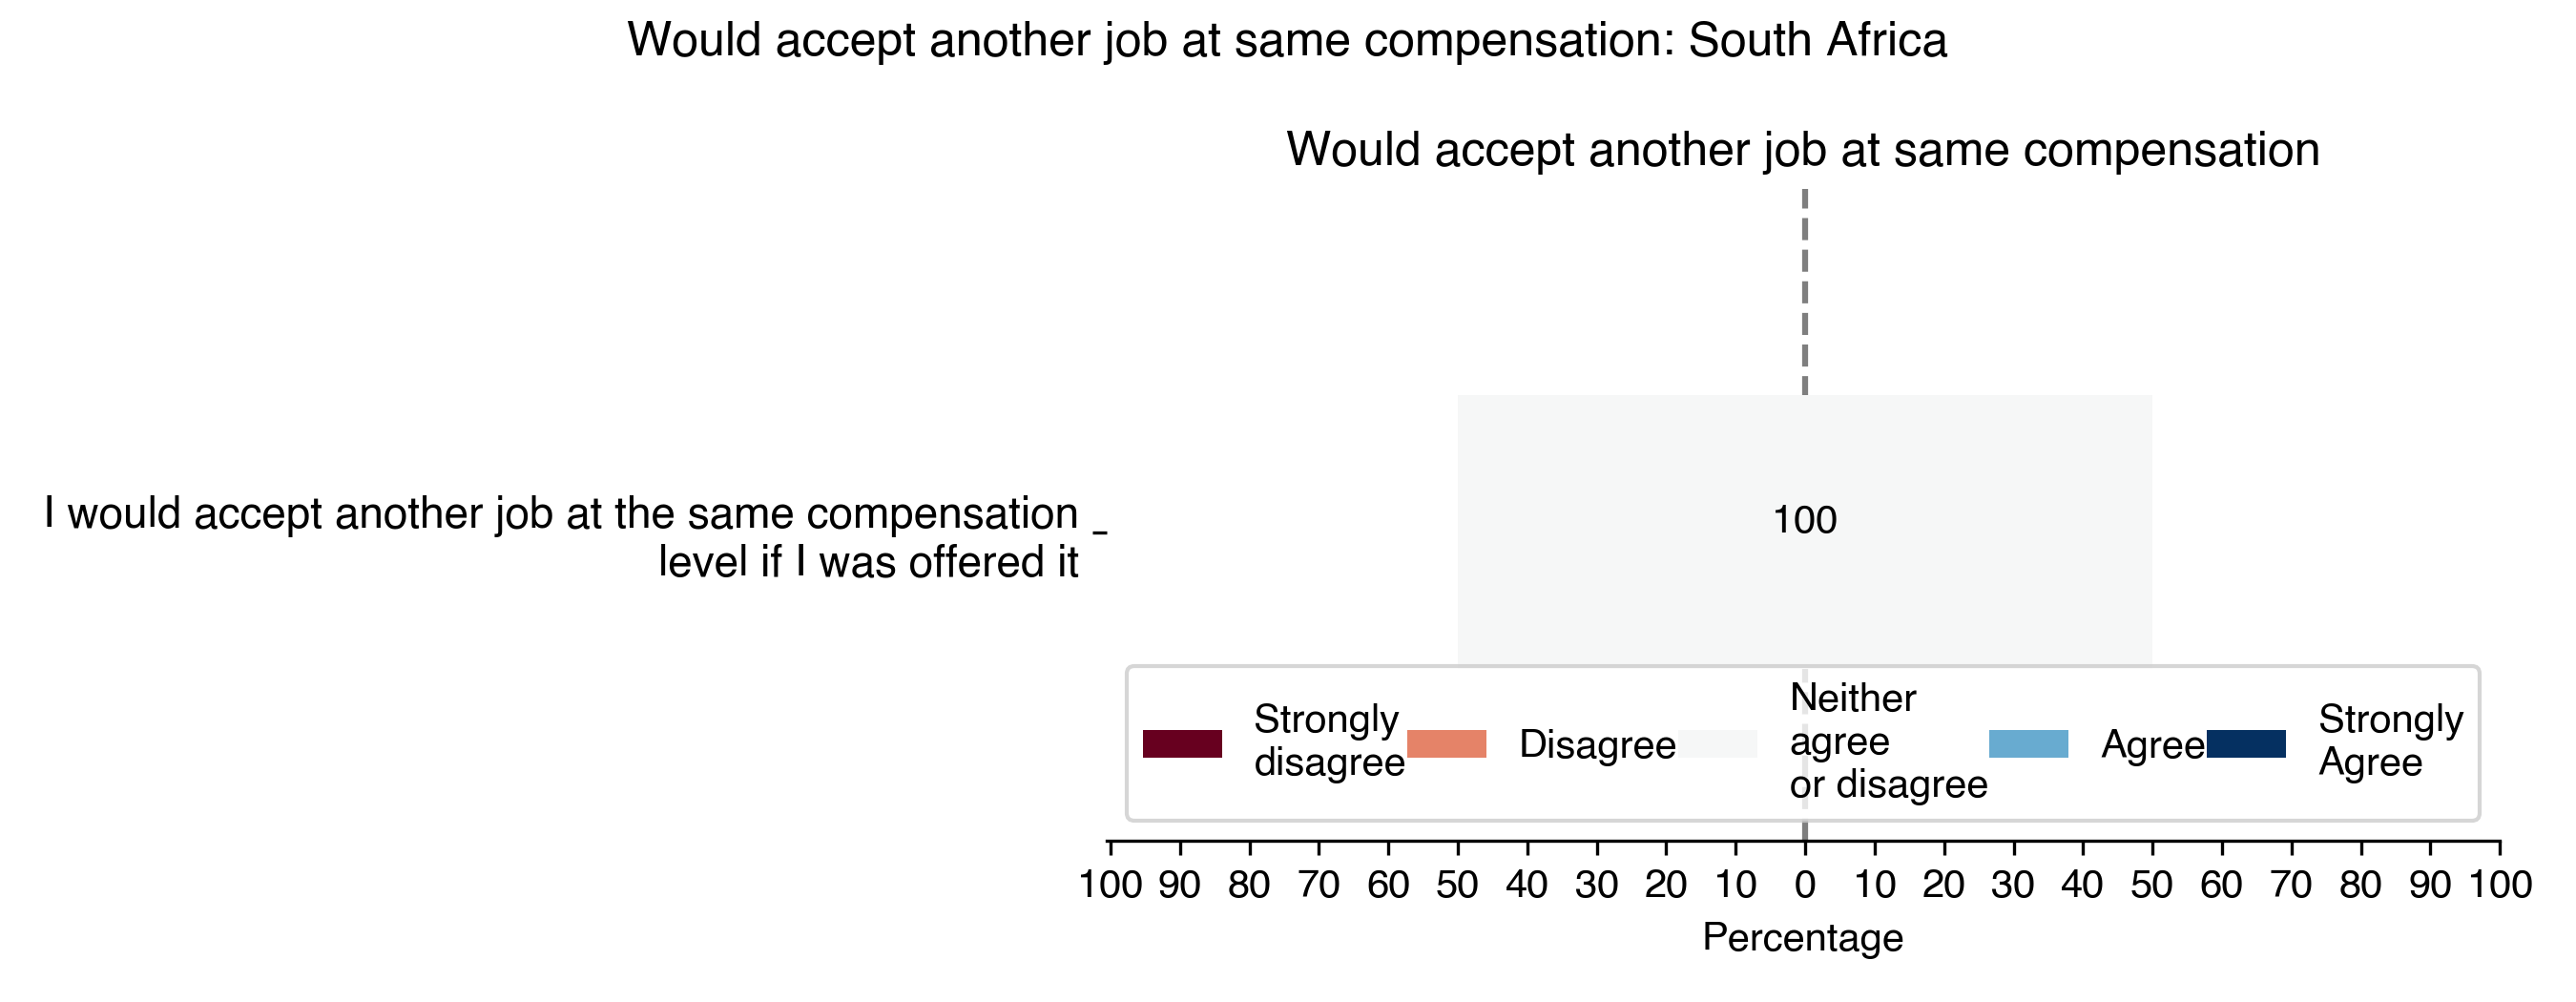 would-accept-another-job-at-same-compensation